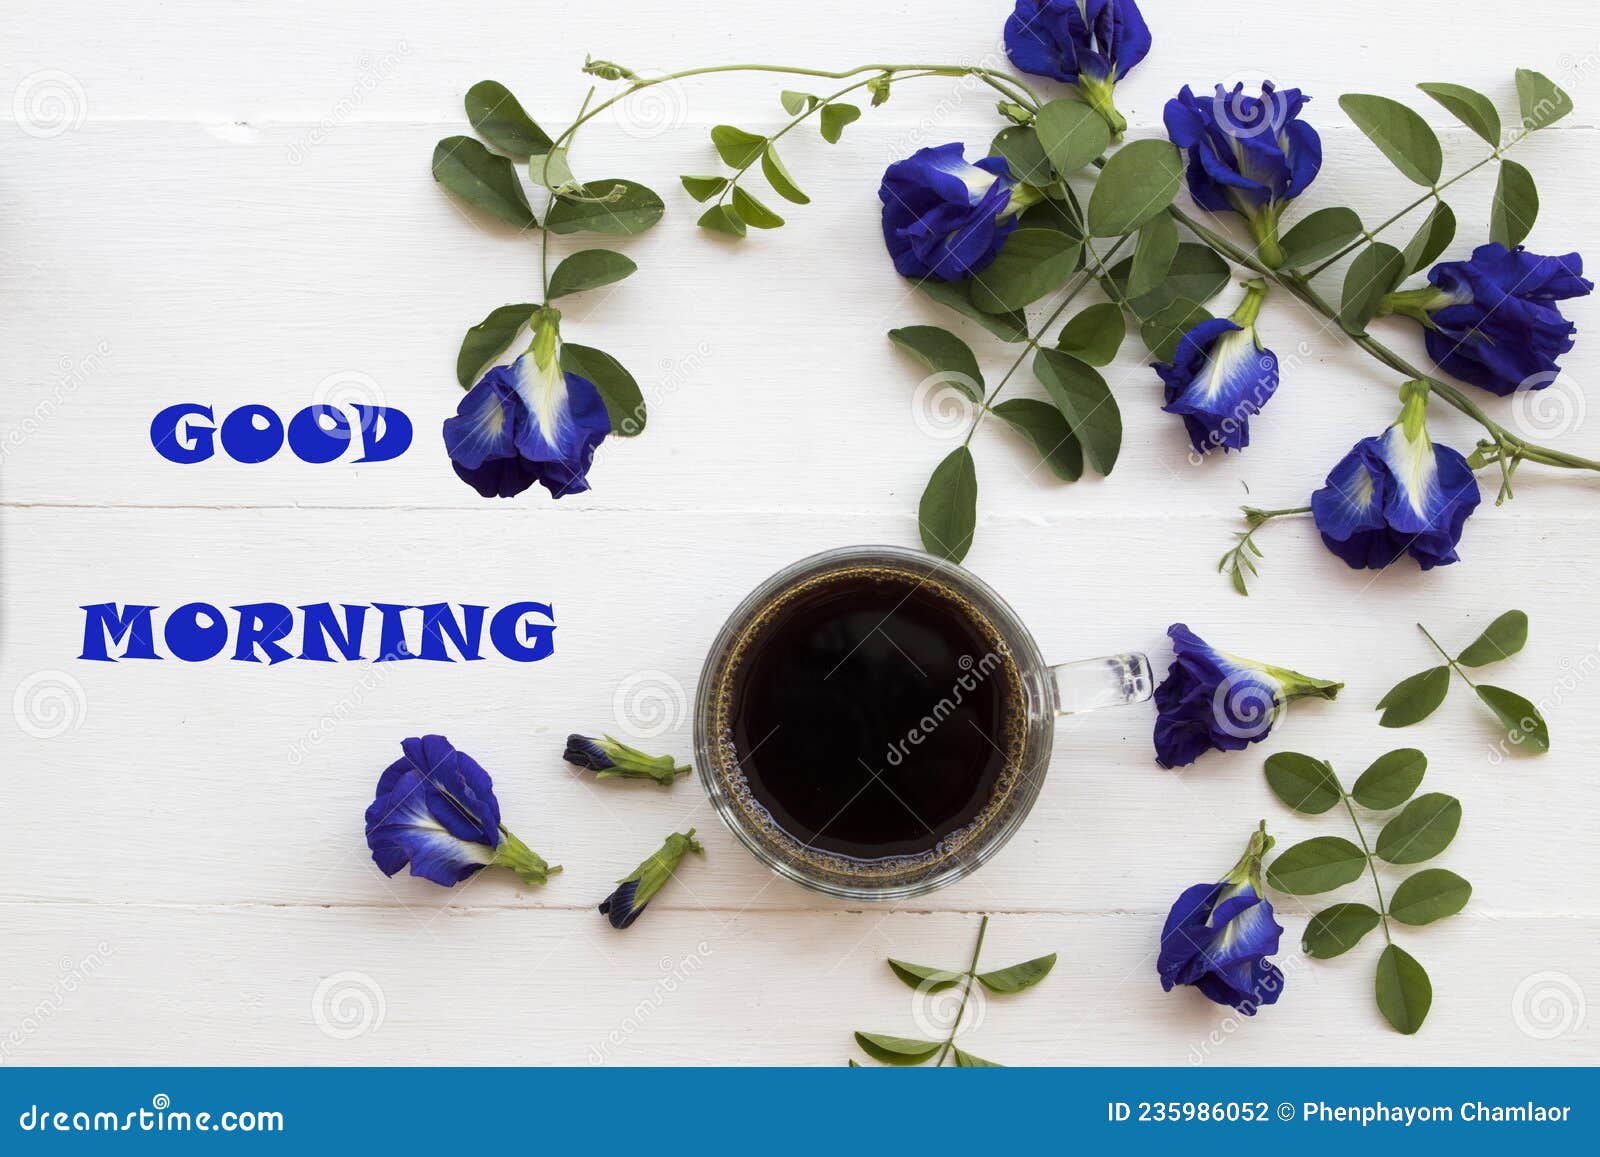 Good Morning Message Card with Hot Coffee, Blue Flowers Butterfly ...